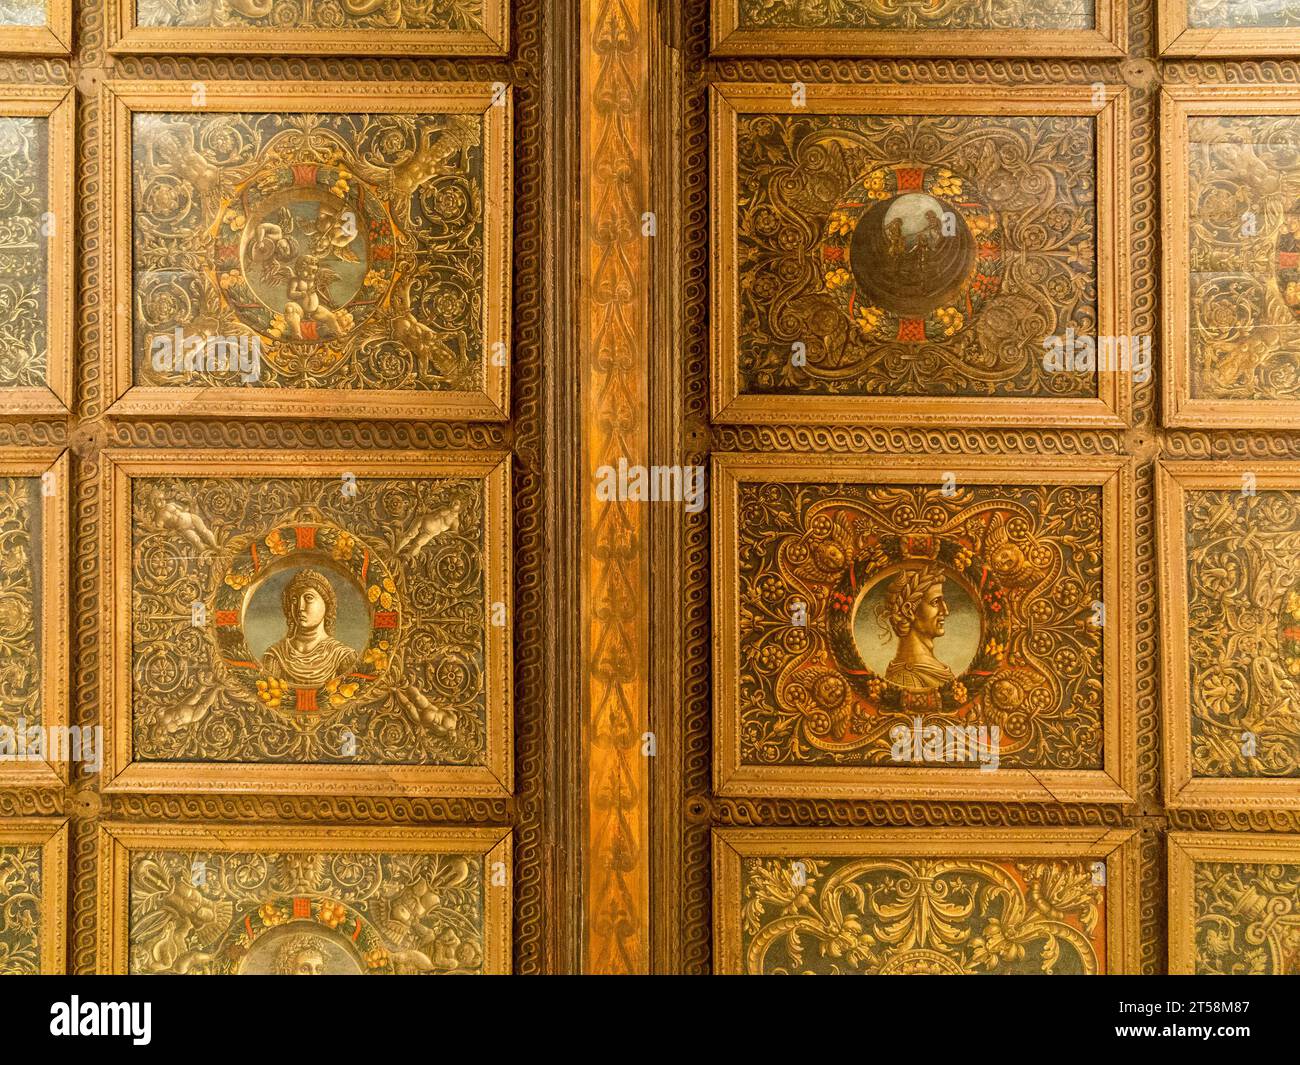 Ceiling of the Ca d'Oro vlla in Venice, Italy. The carved wooden ceiling is decorated with figures. Stock Photo